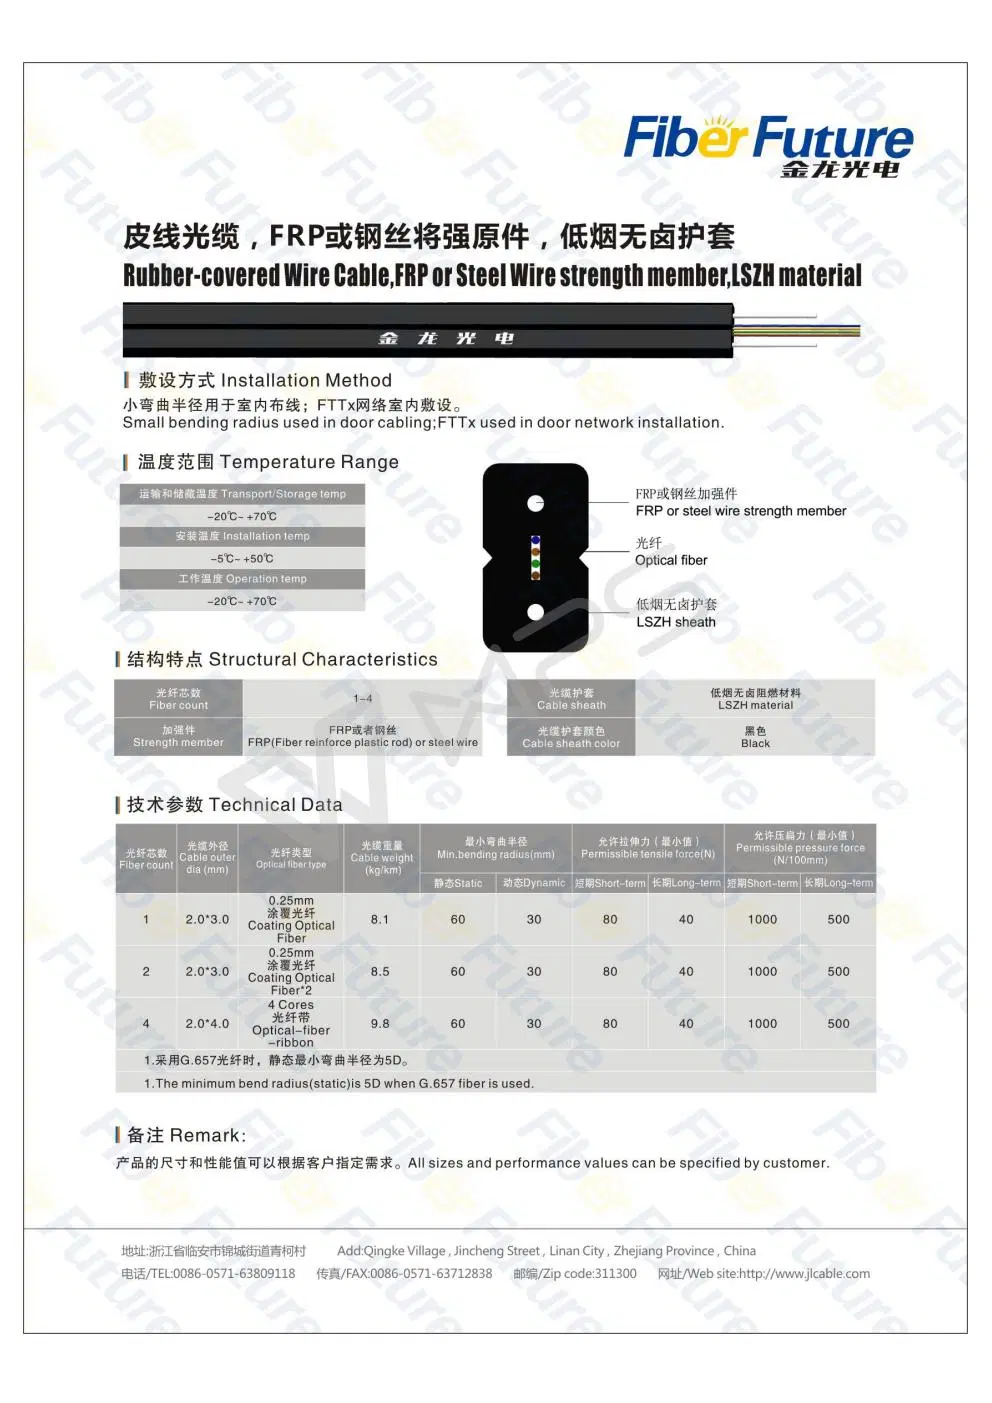 1-4 FTTX Used in Door Network Installation Fiber Optic Cable